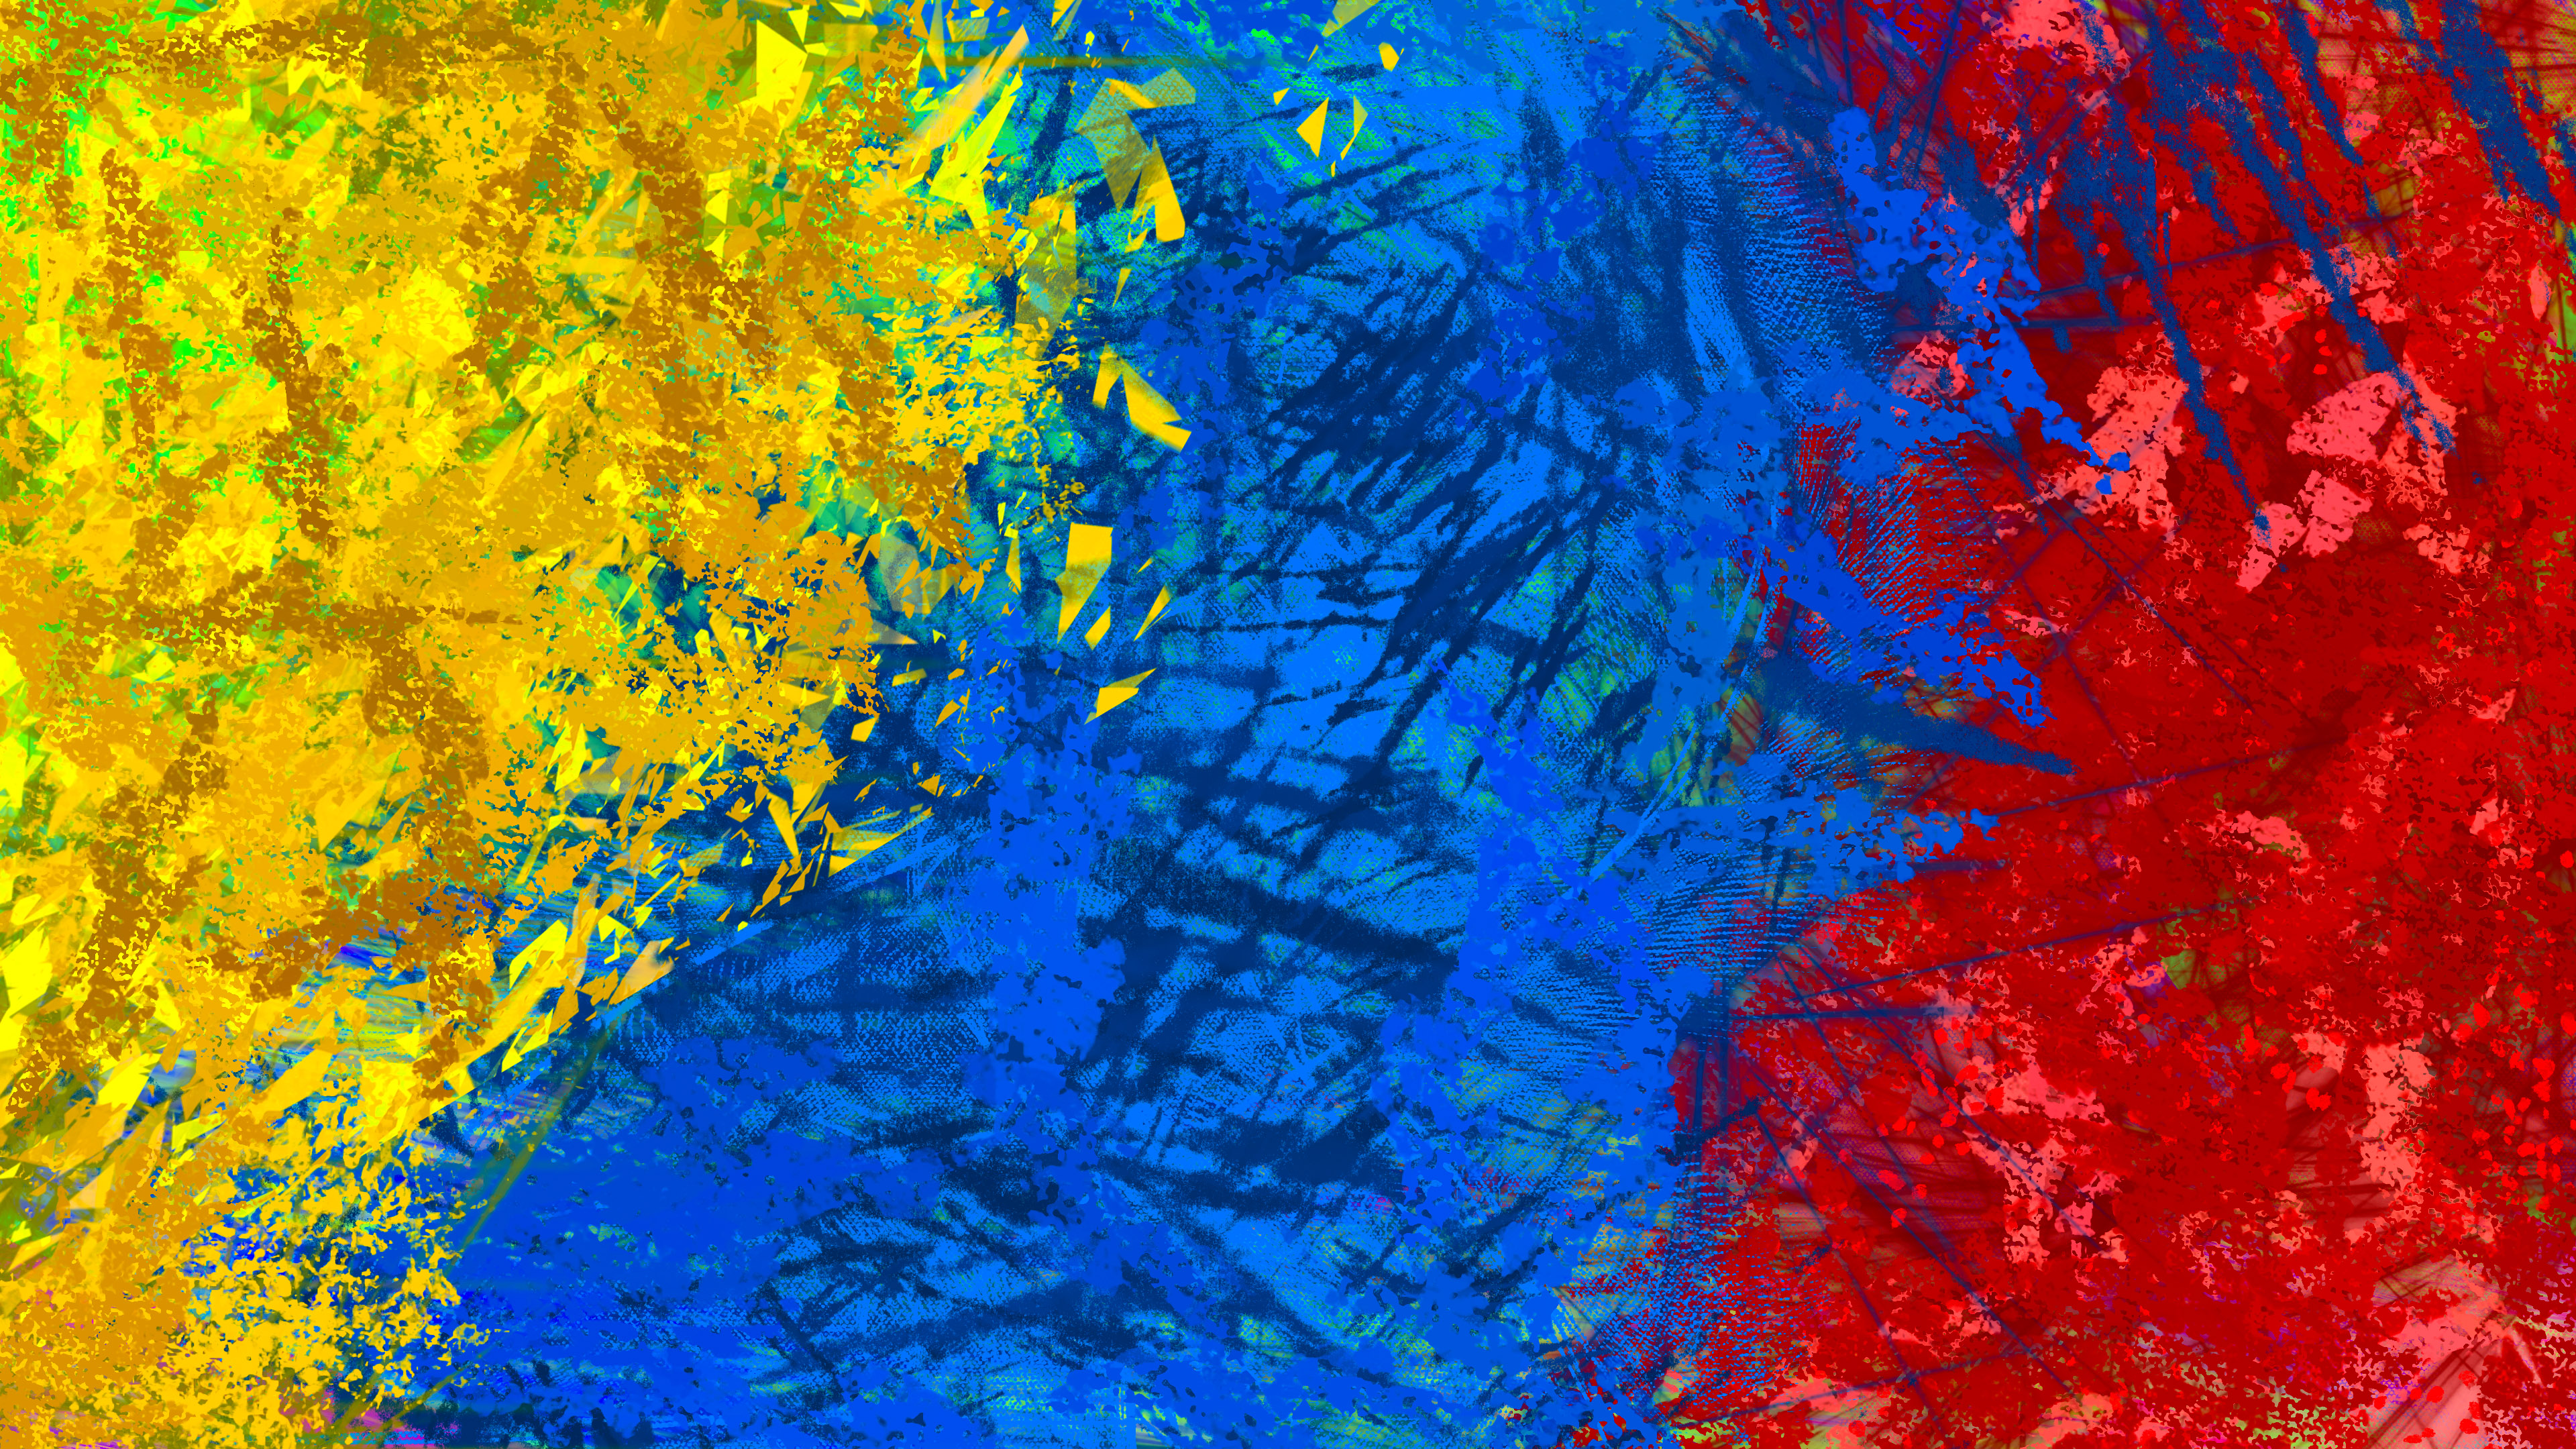 desktop wallpaper to free download of abstract art in 4K Ultra HD resolution